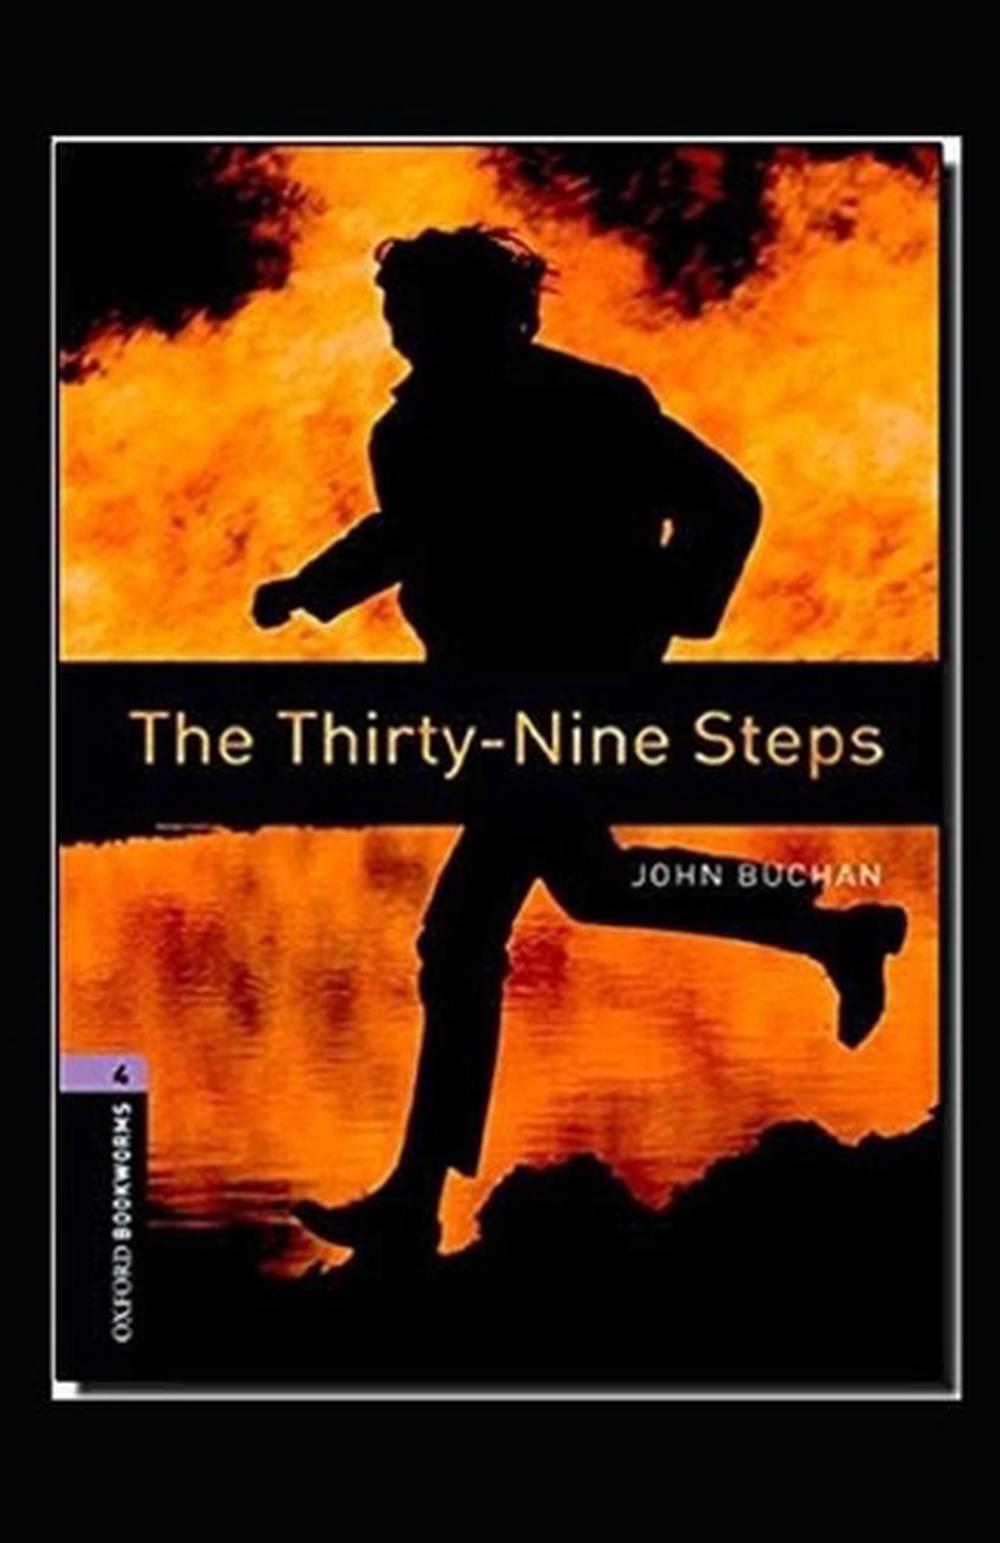 the thirty nine steps book review